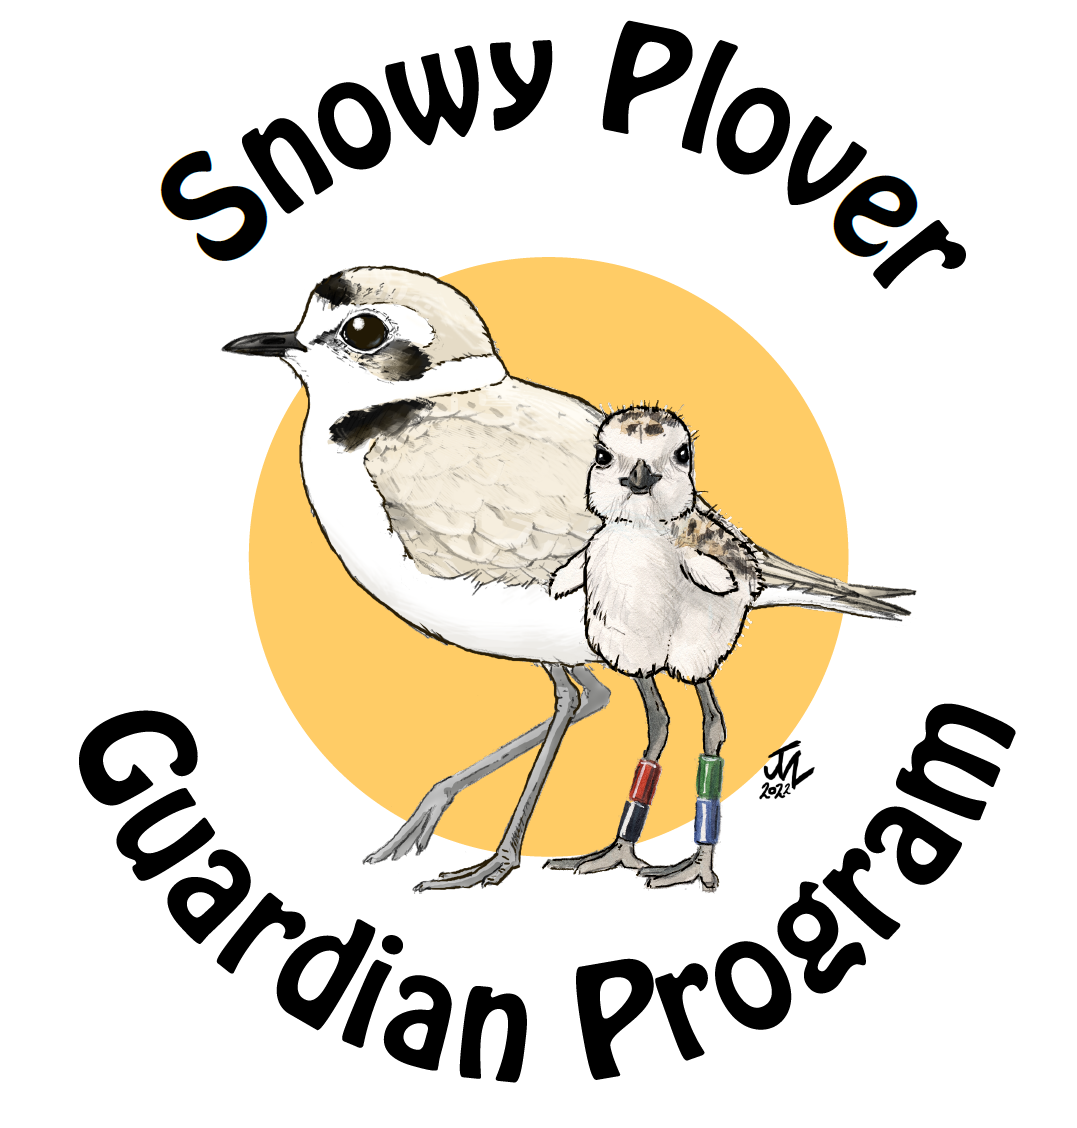 The Snowy Plover Guargian Program Logo. An adult plover and a plover chick pose in front of a yellow circle.